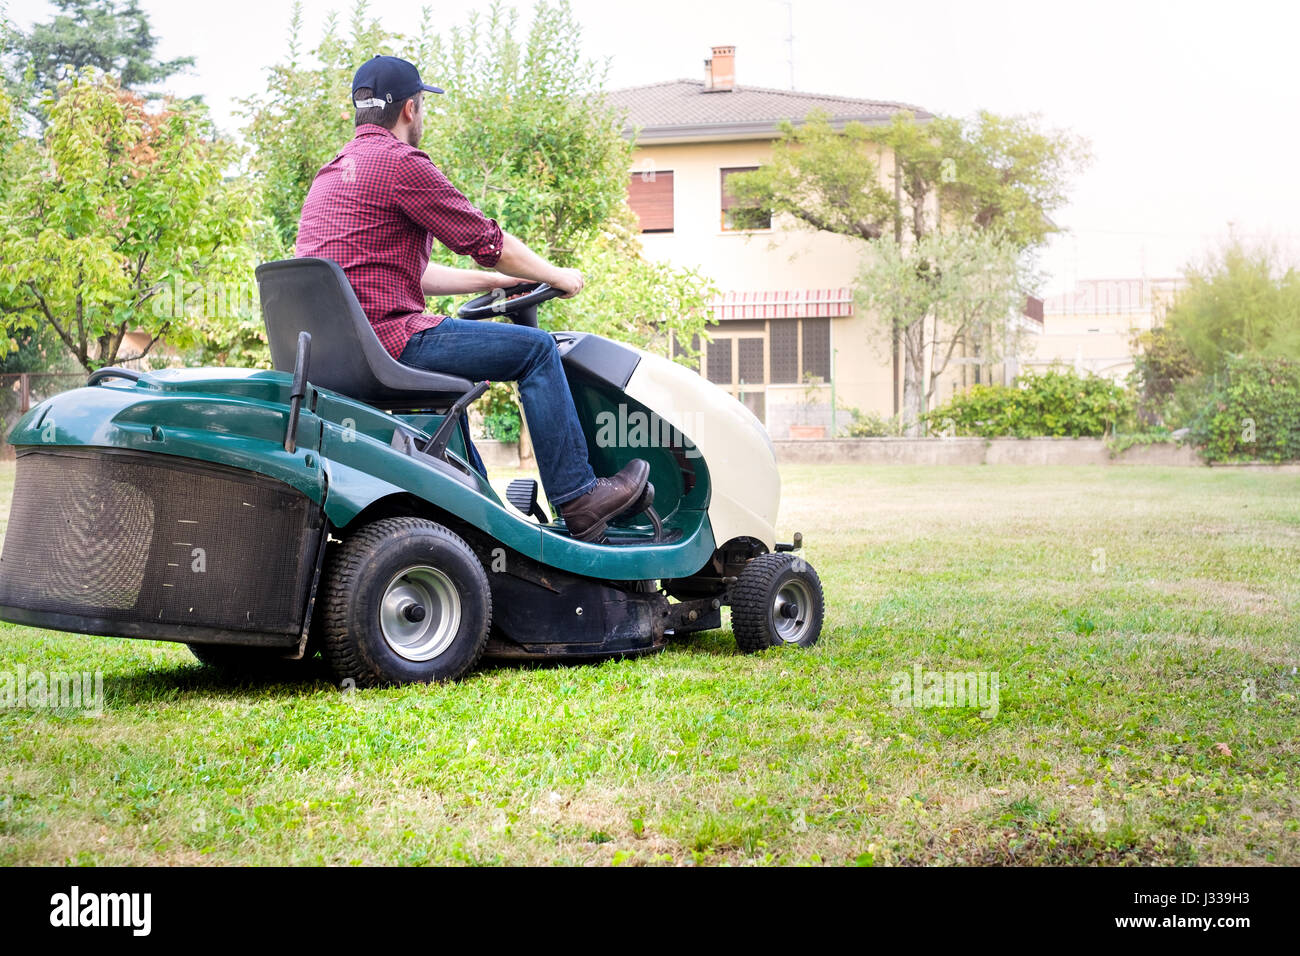 Gardener cutting the grass of a garden seated on a lawn mower Stock Photo